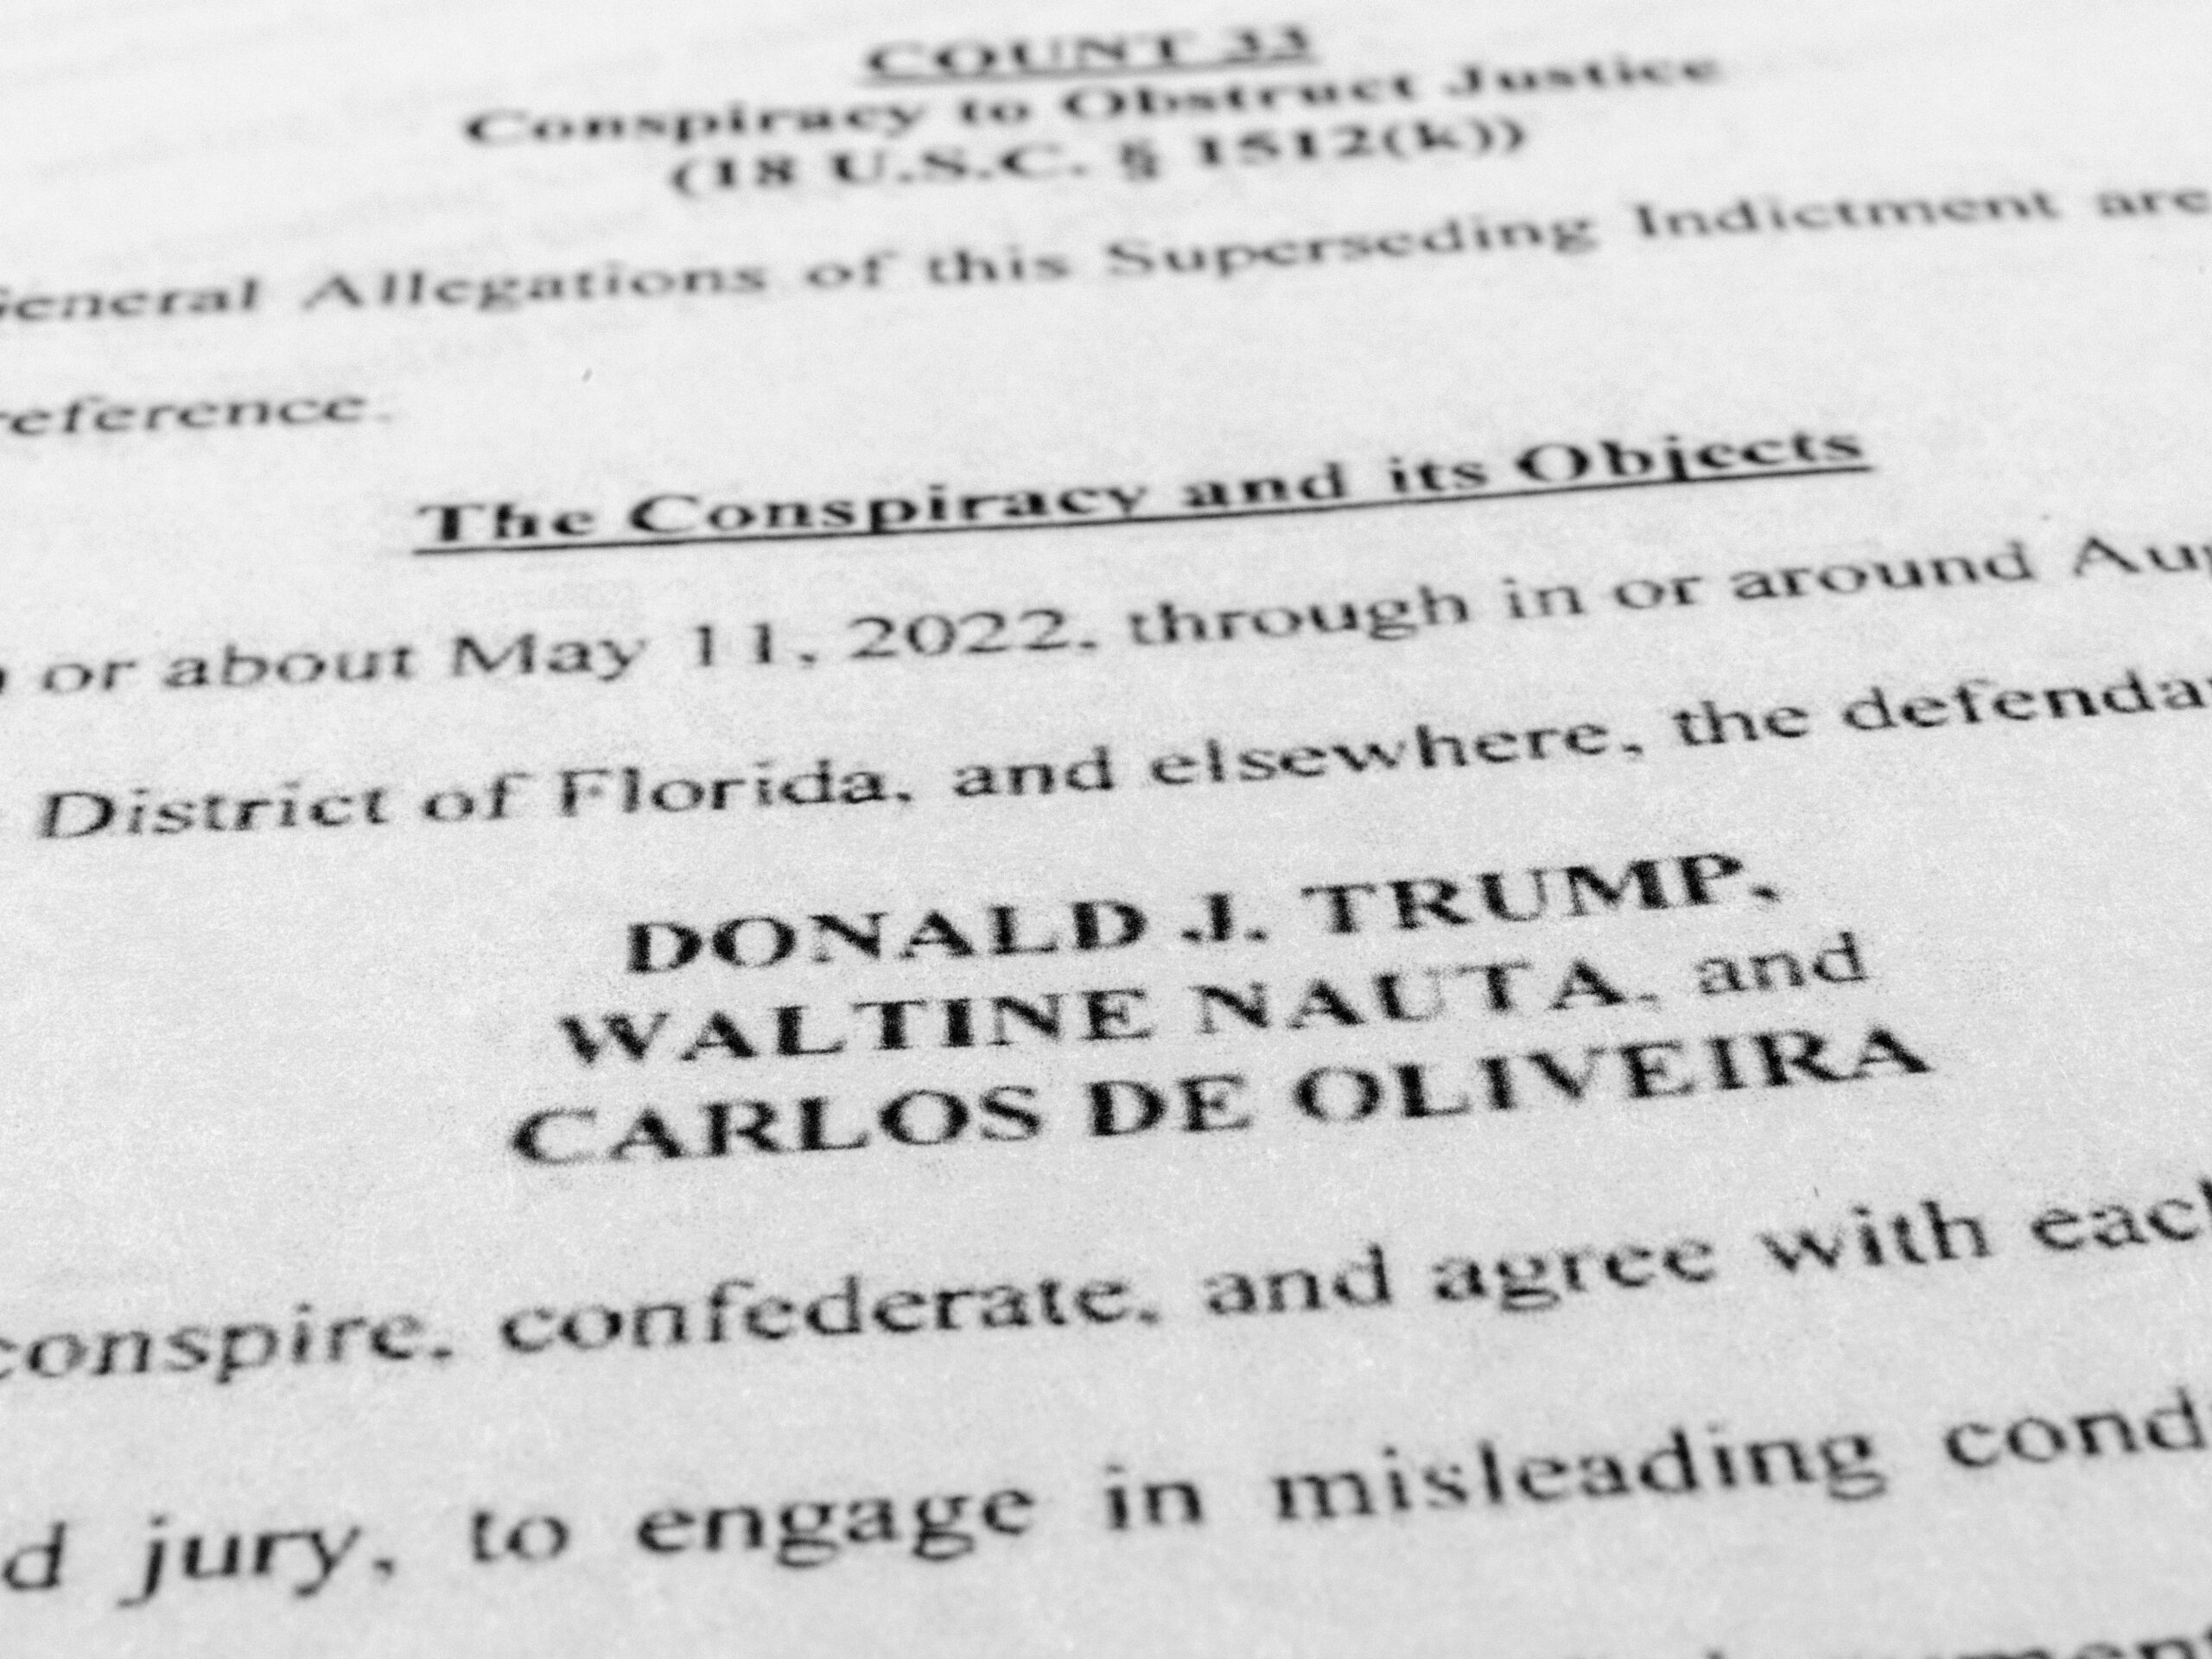 Trump’s trial over classified documents in Florida could start as soon as this summer